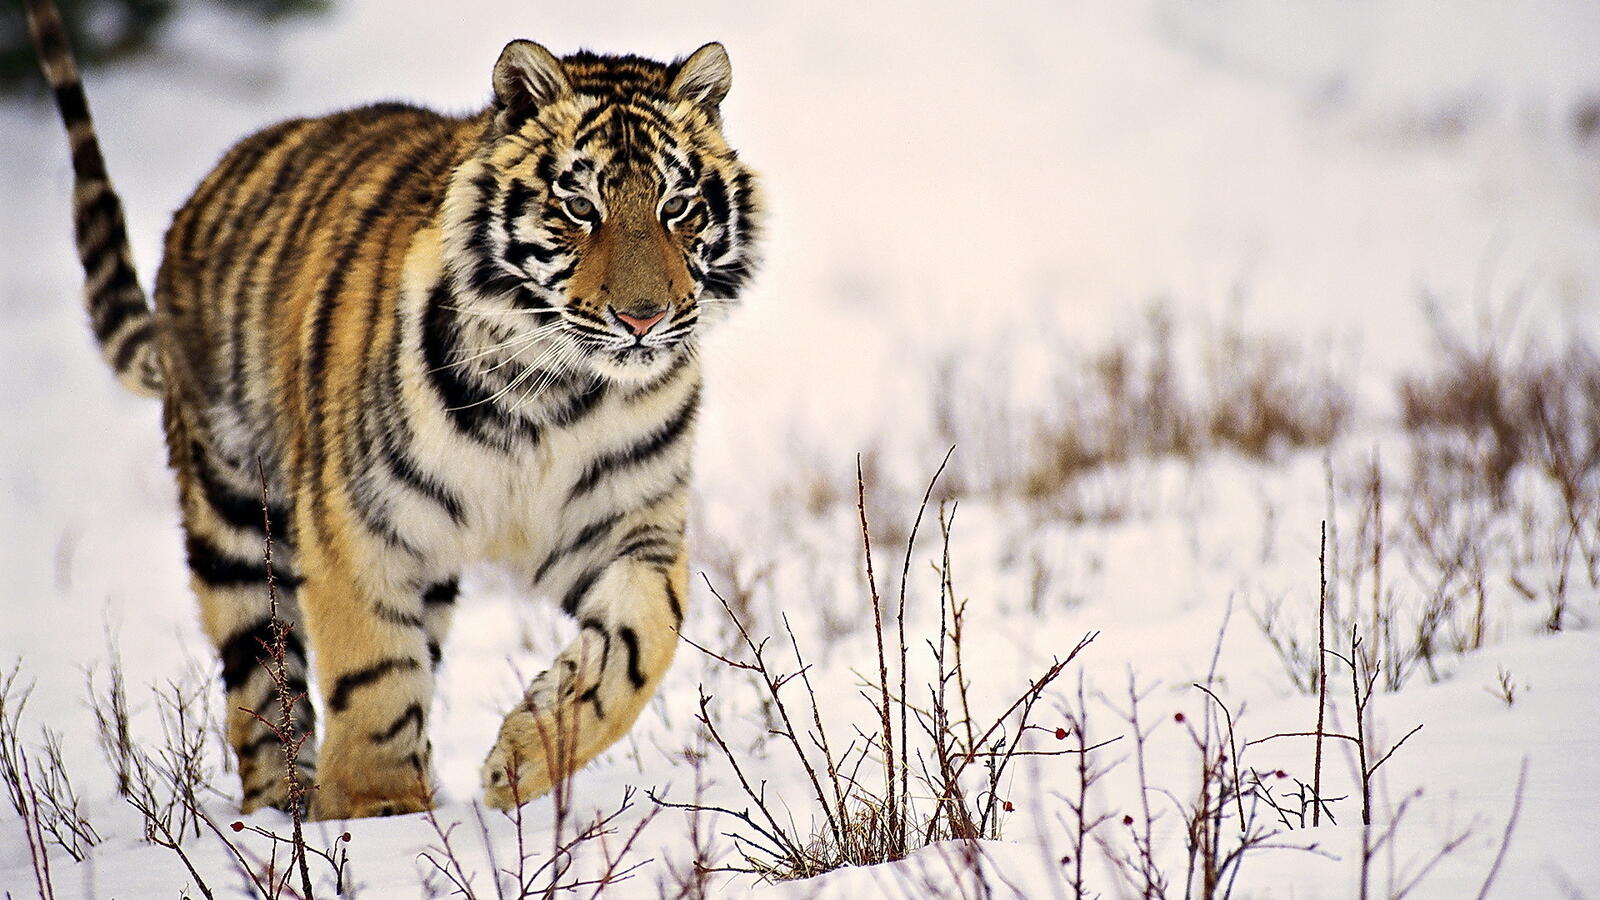 Wallpapers tiger winter snow on the desktop